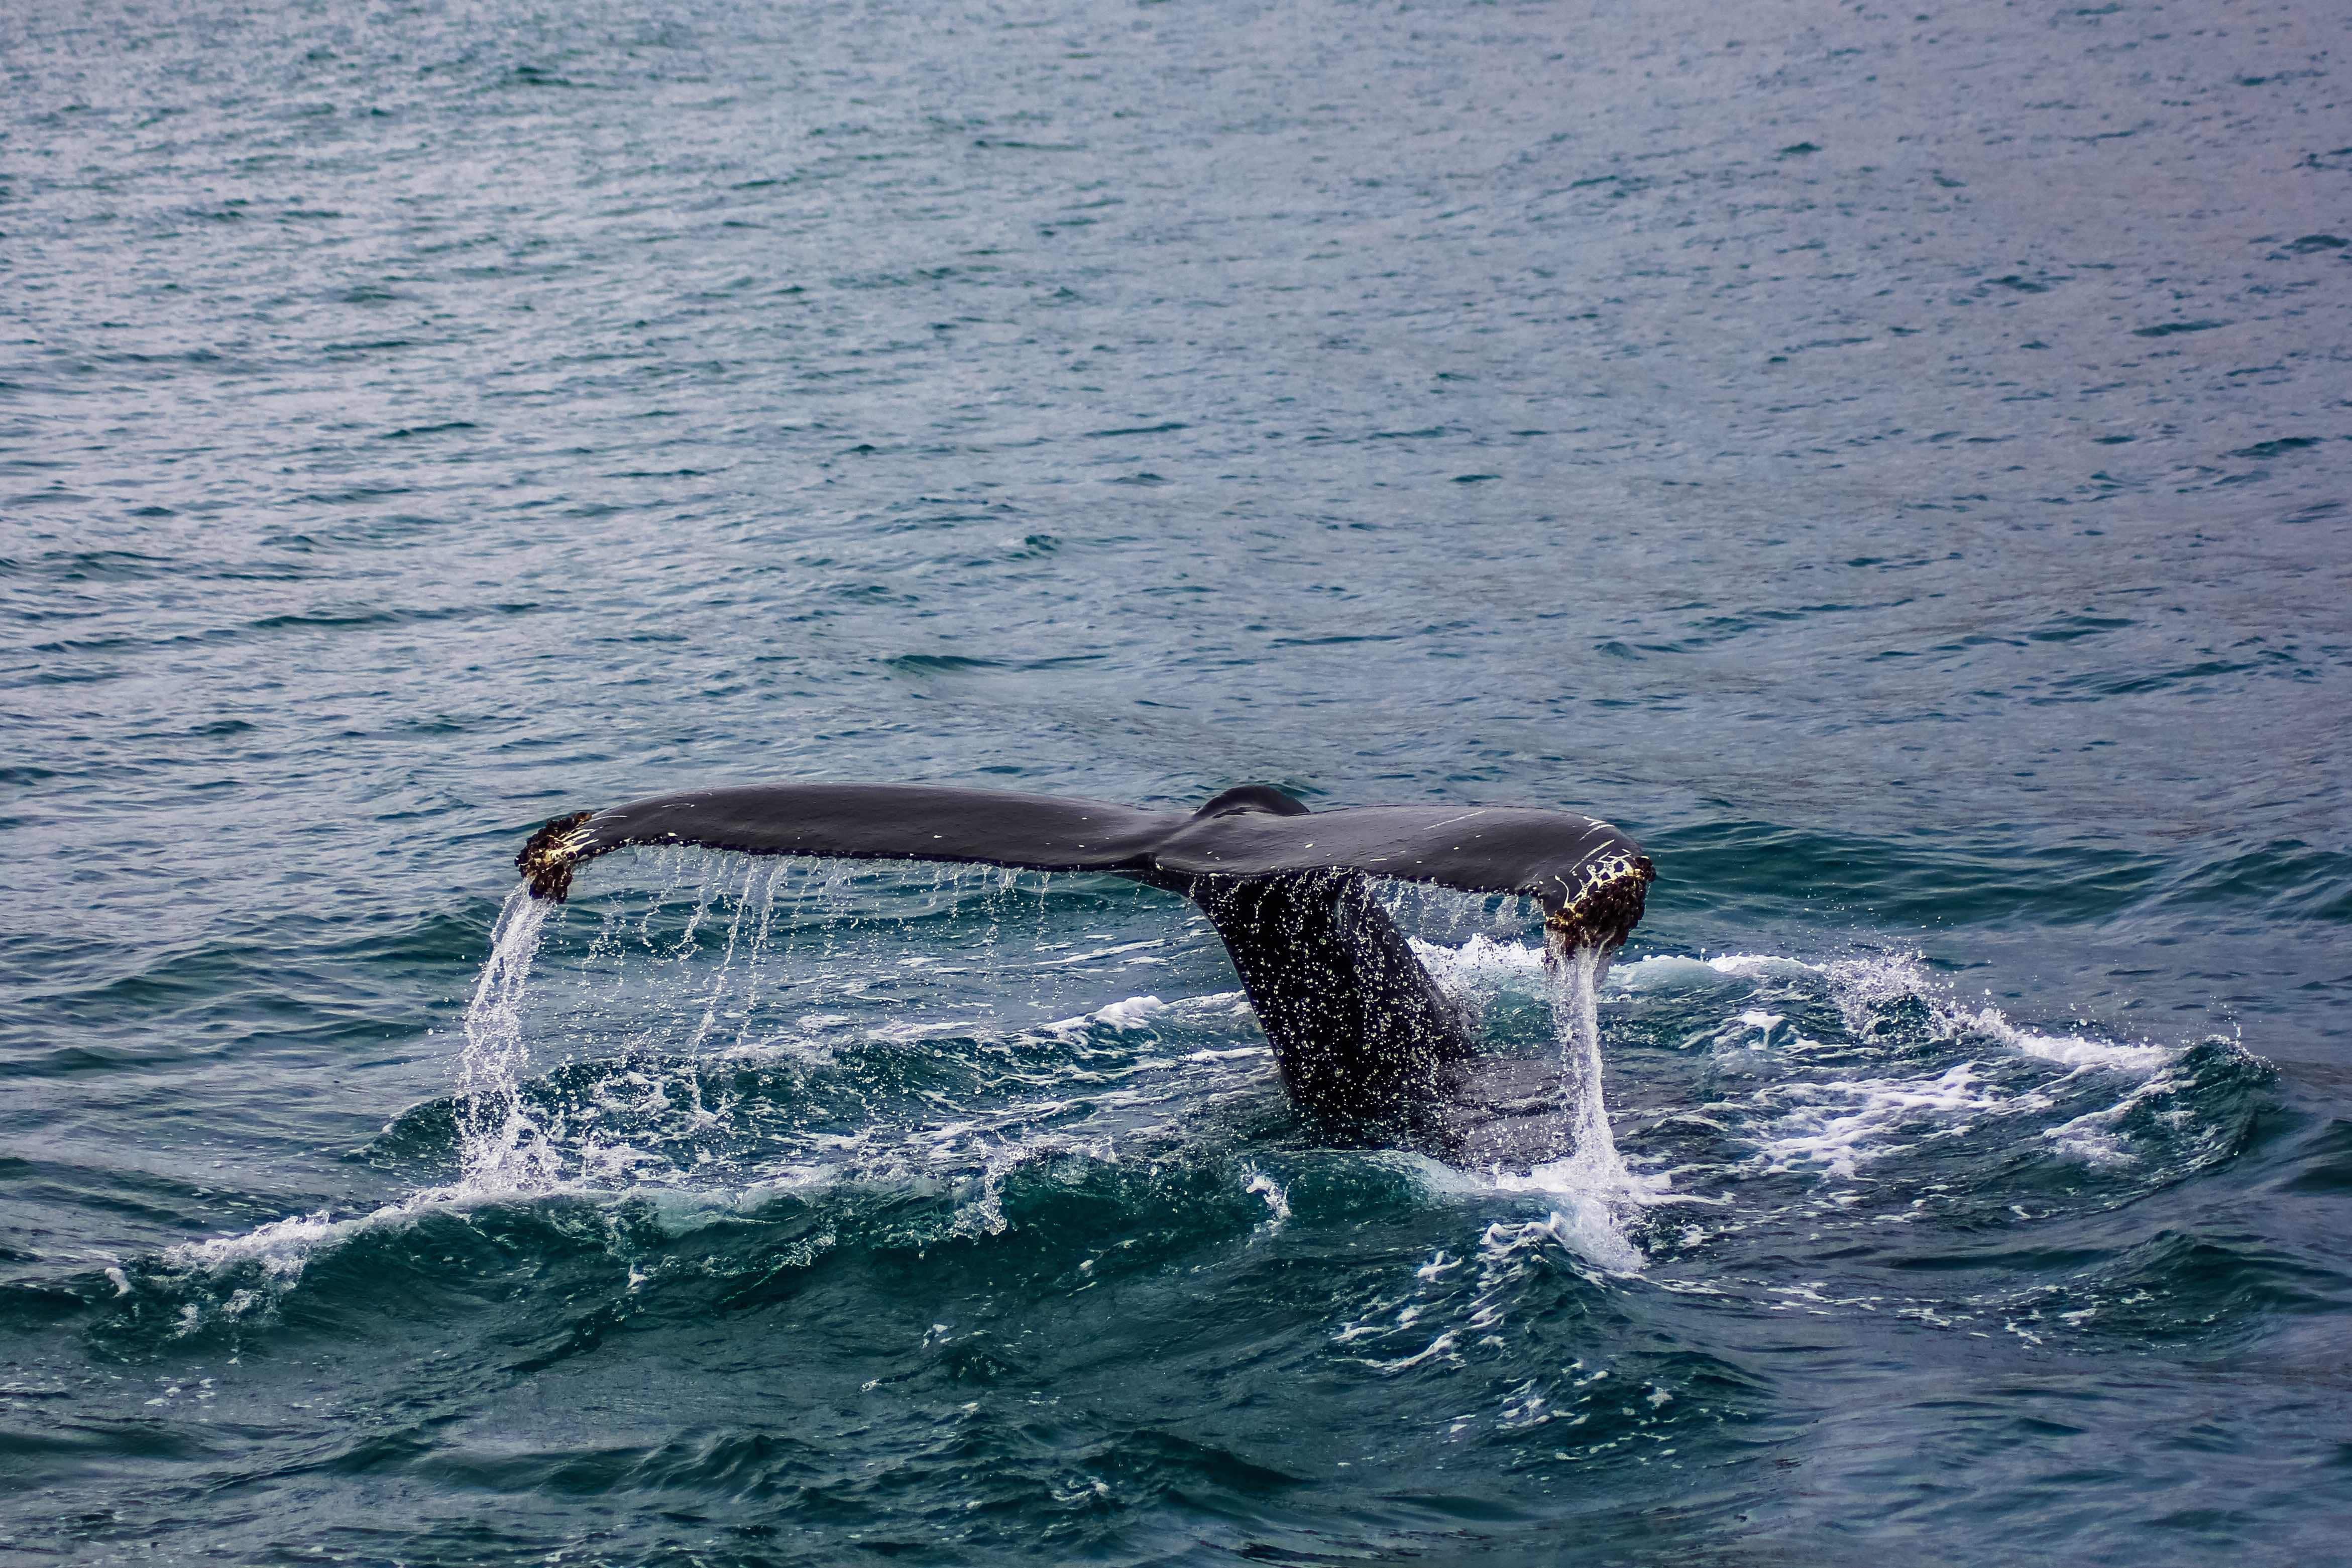 Whale watching by boat in Kaikoura